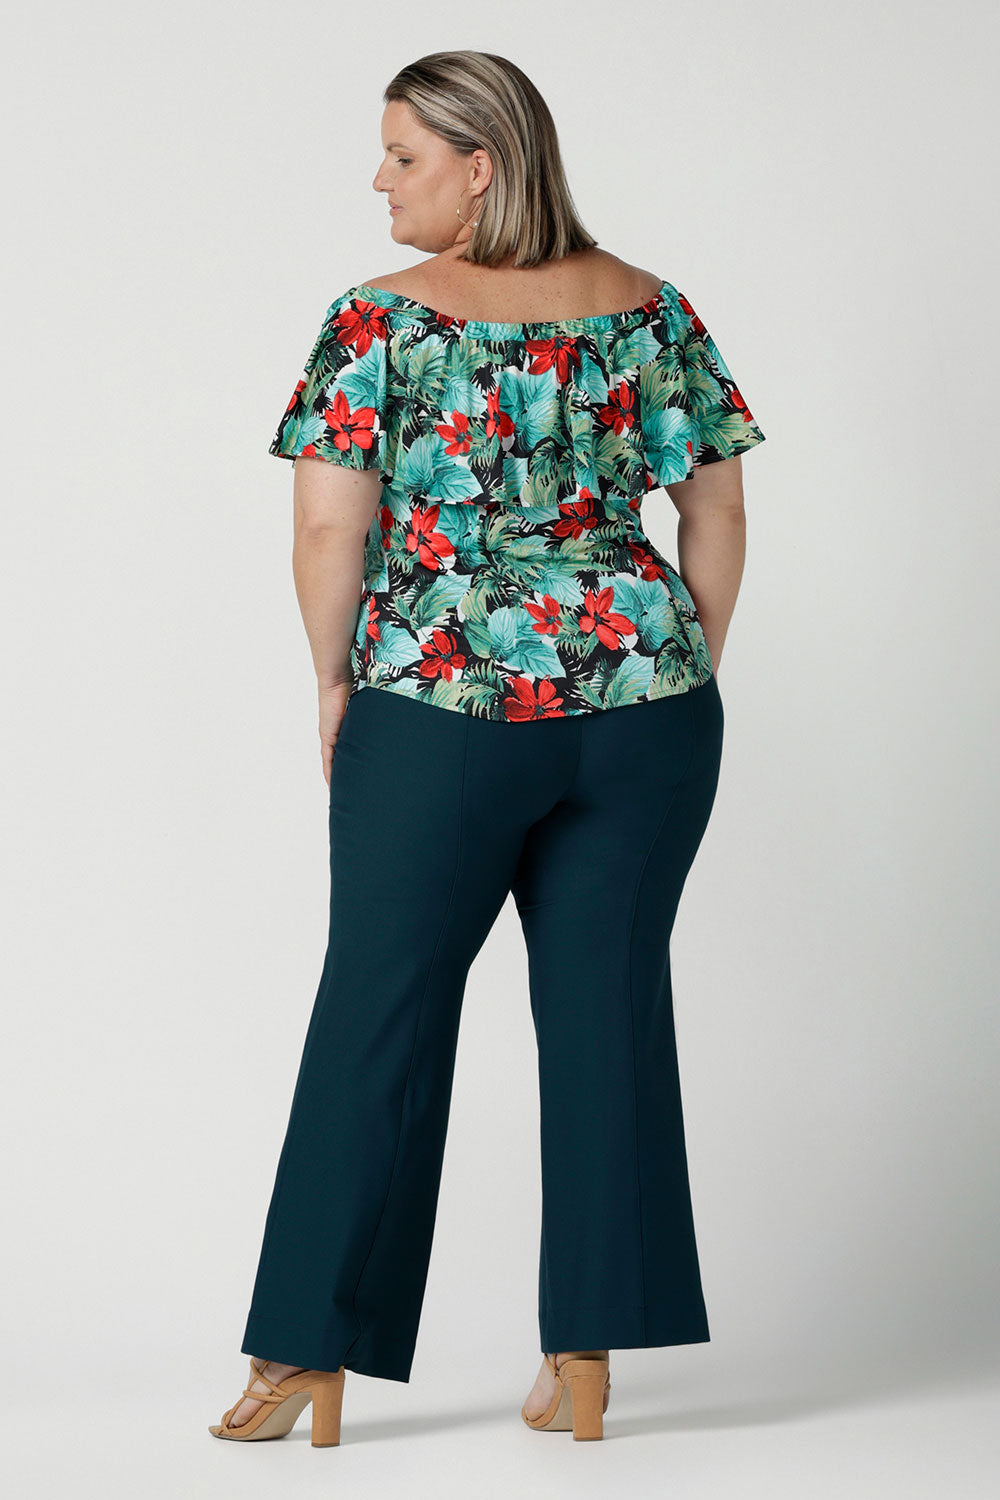 Back view of off shoulder Briar Top in Havana on a size 18 model. Tropical print design with red flowers and green palm leaf. Soft slinky jersey. Wear this top multiple ways one shoulder, off shoulder and on shoulder. Styled back with Brett pants in Petrol. Made in Australia for women size 8 - 24.